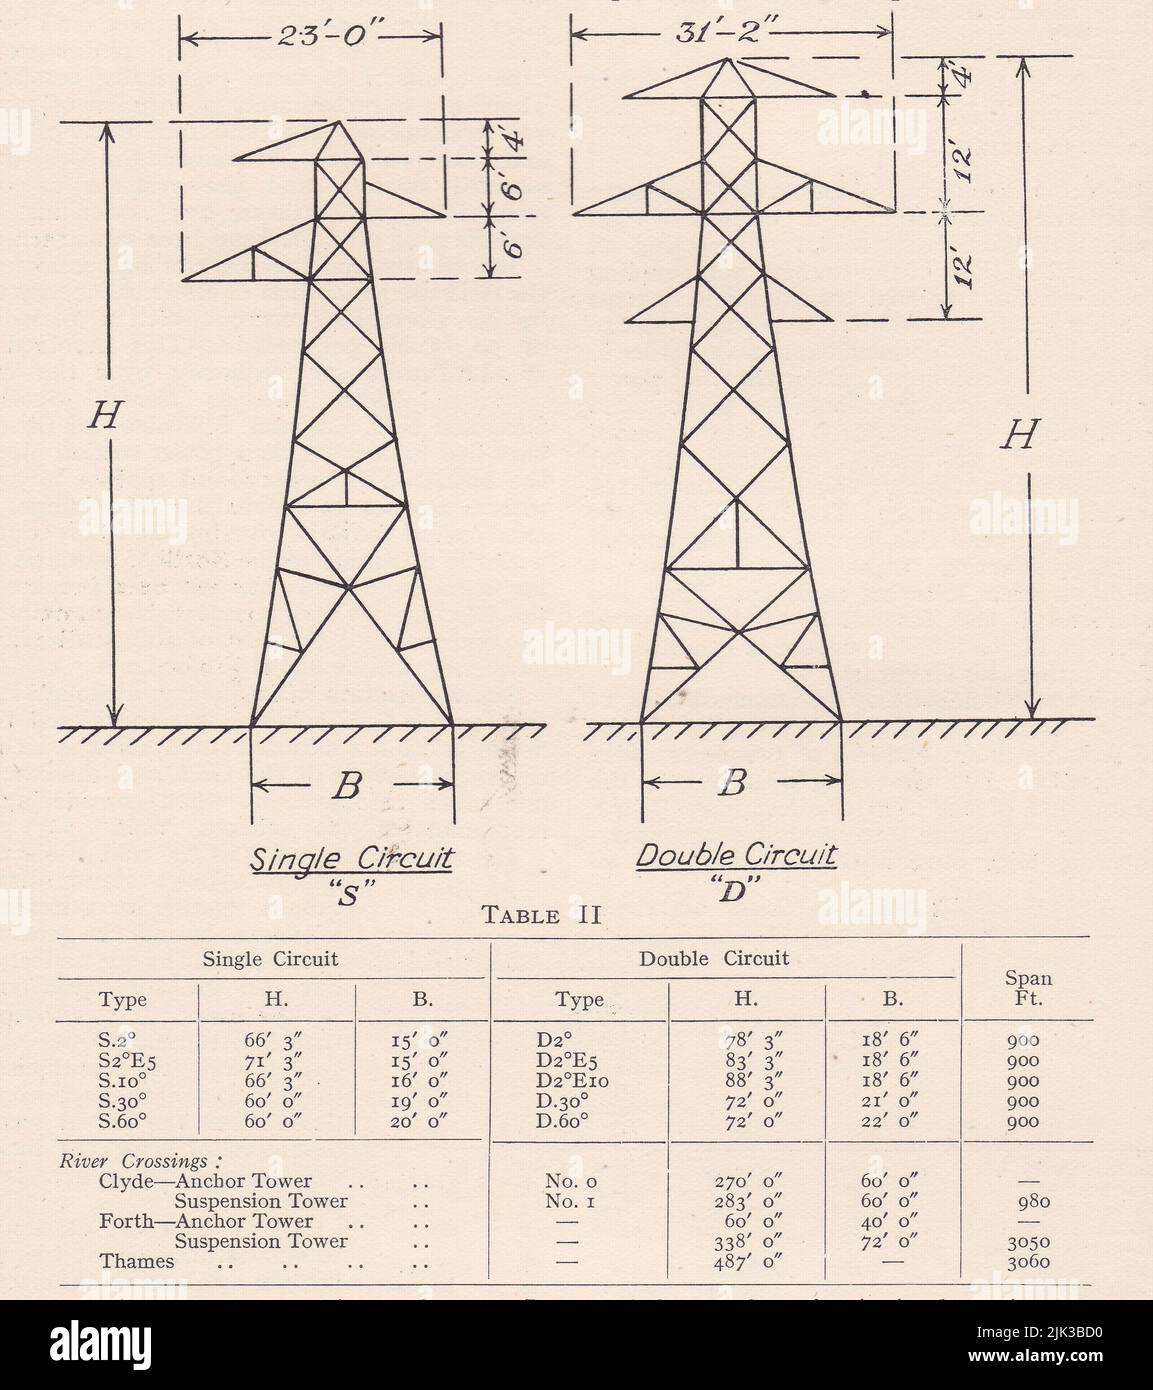 Vintage diagrams and table of electric grid insulators. Stock Photo